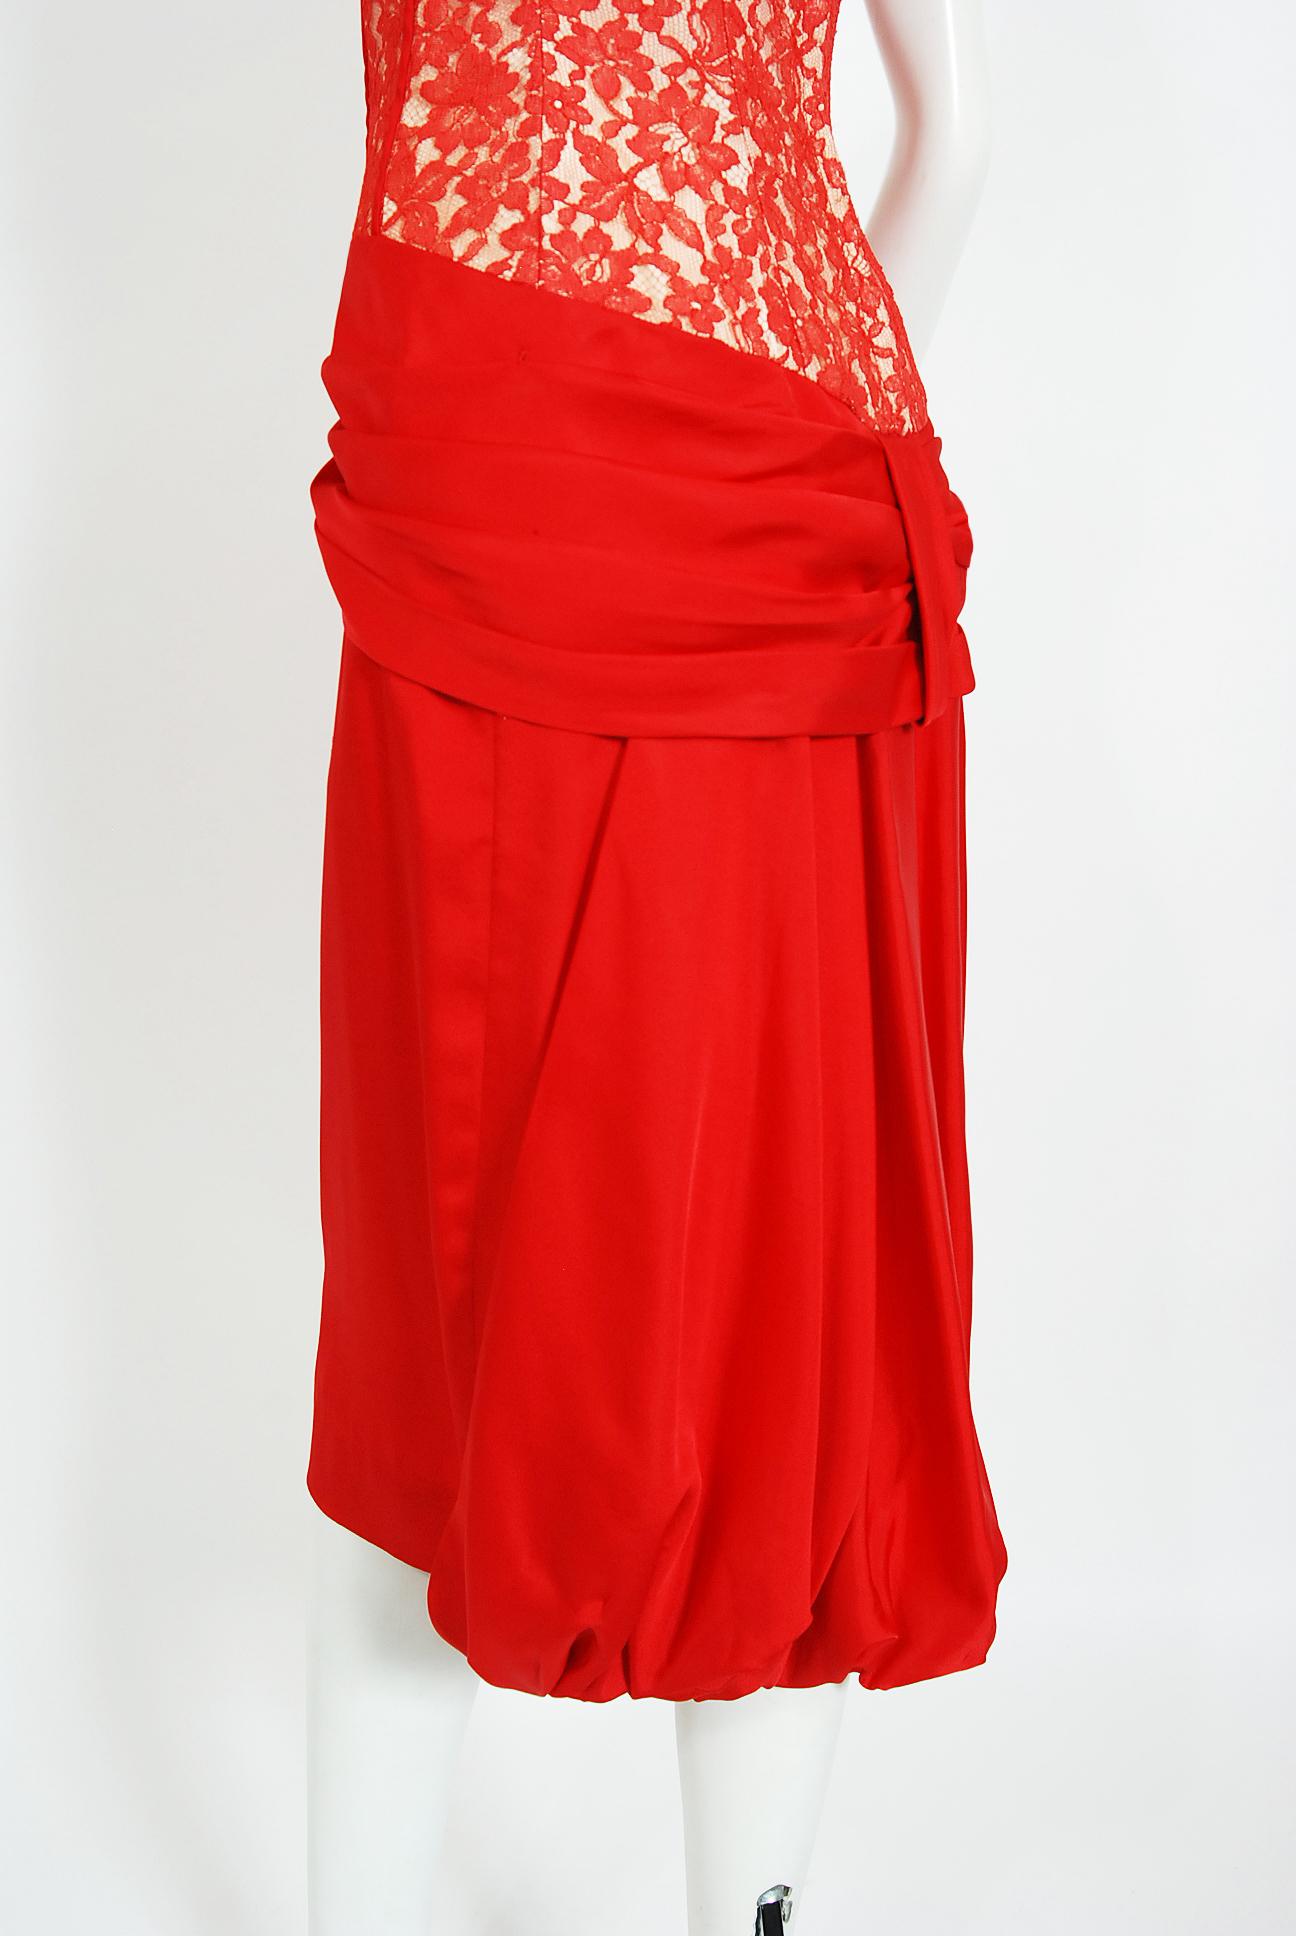 Vintage 1950s Lilli Diamond Red Silk Lace Illusion Draped Hourglass Pin-Up Dress In Good Condition In Beverly Hills, CA